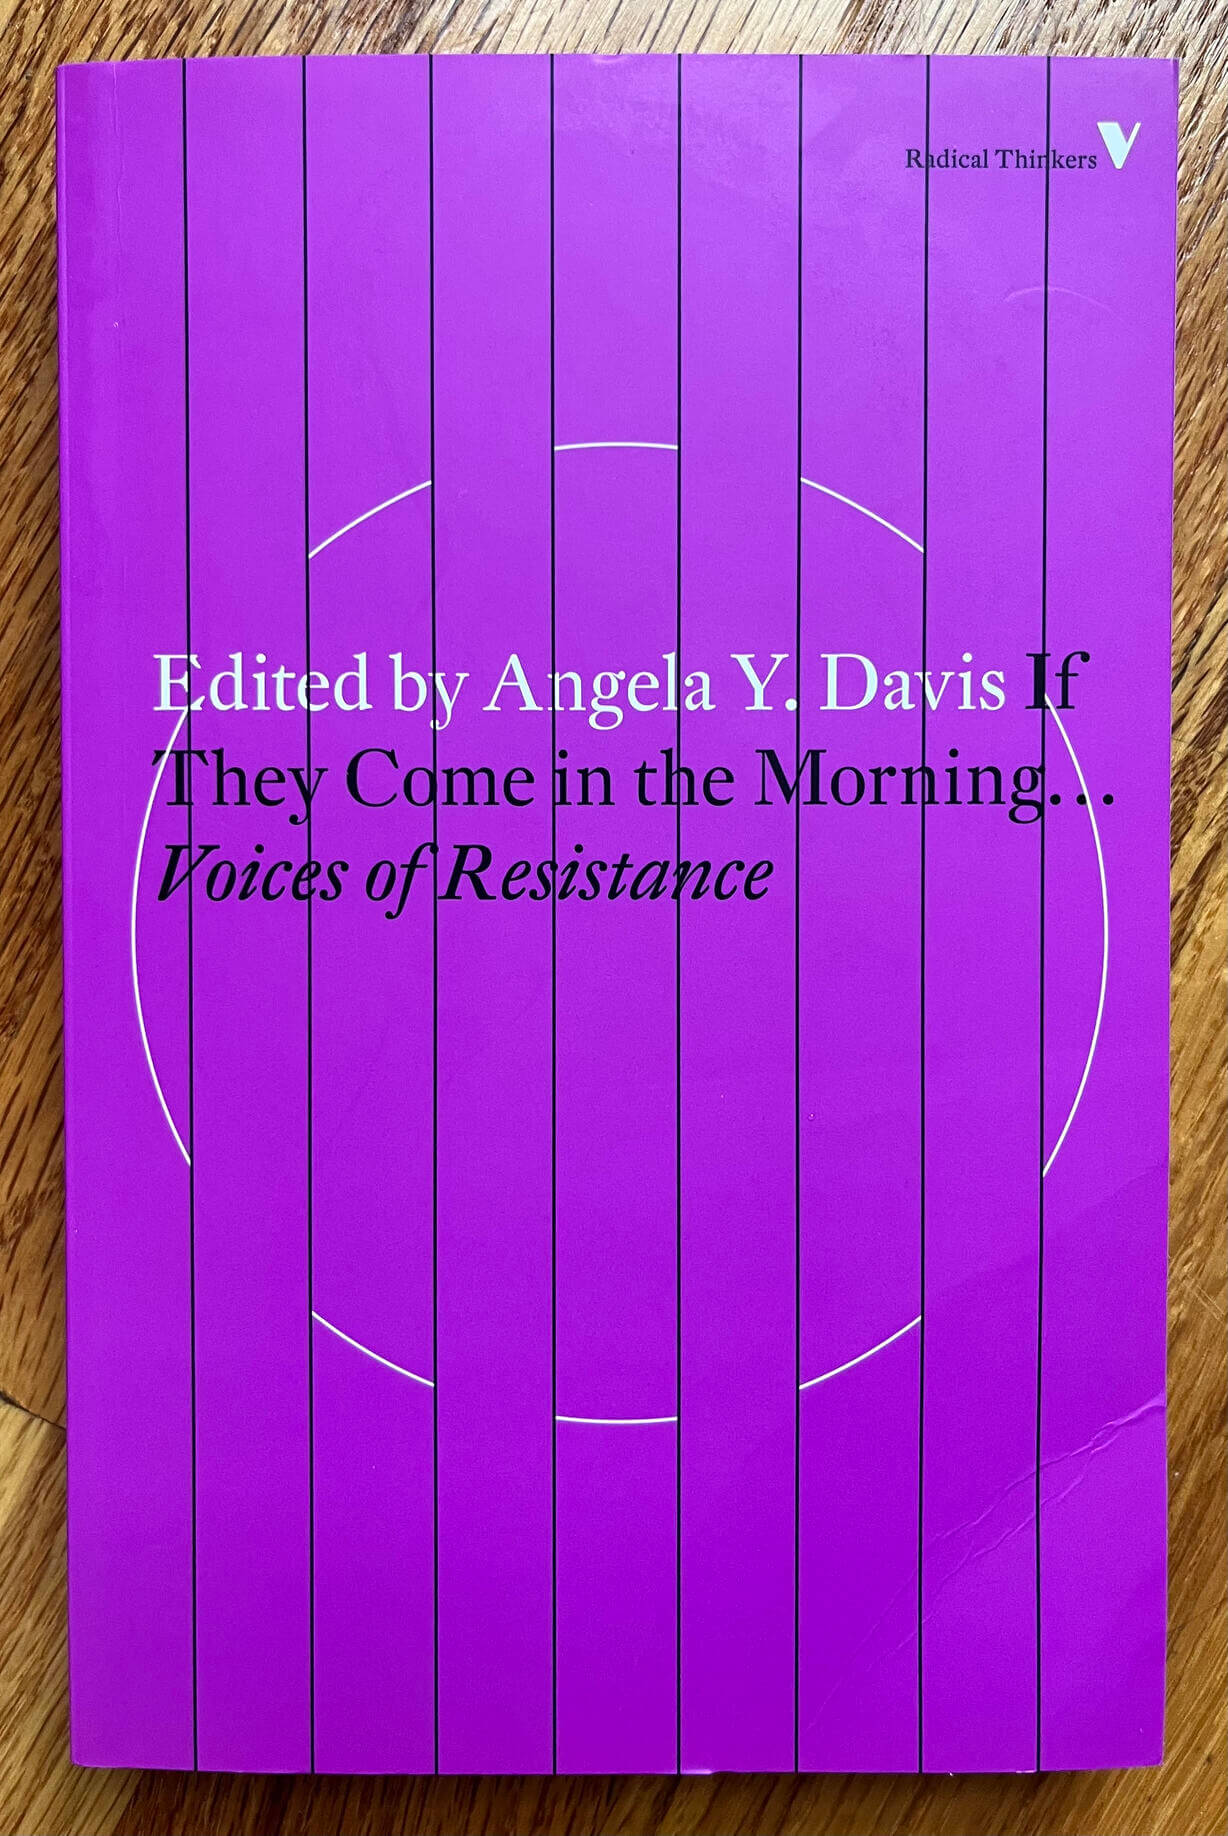 “If They Come in the Morning: Voices of Resistance” edited by Angela Y. Davis